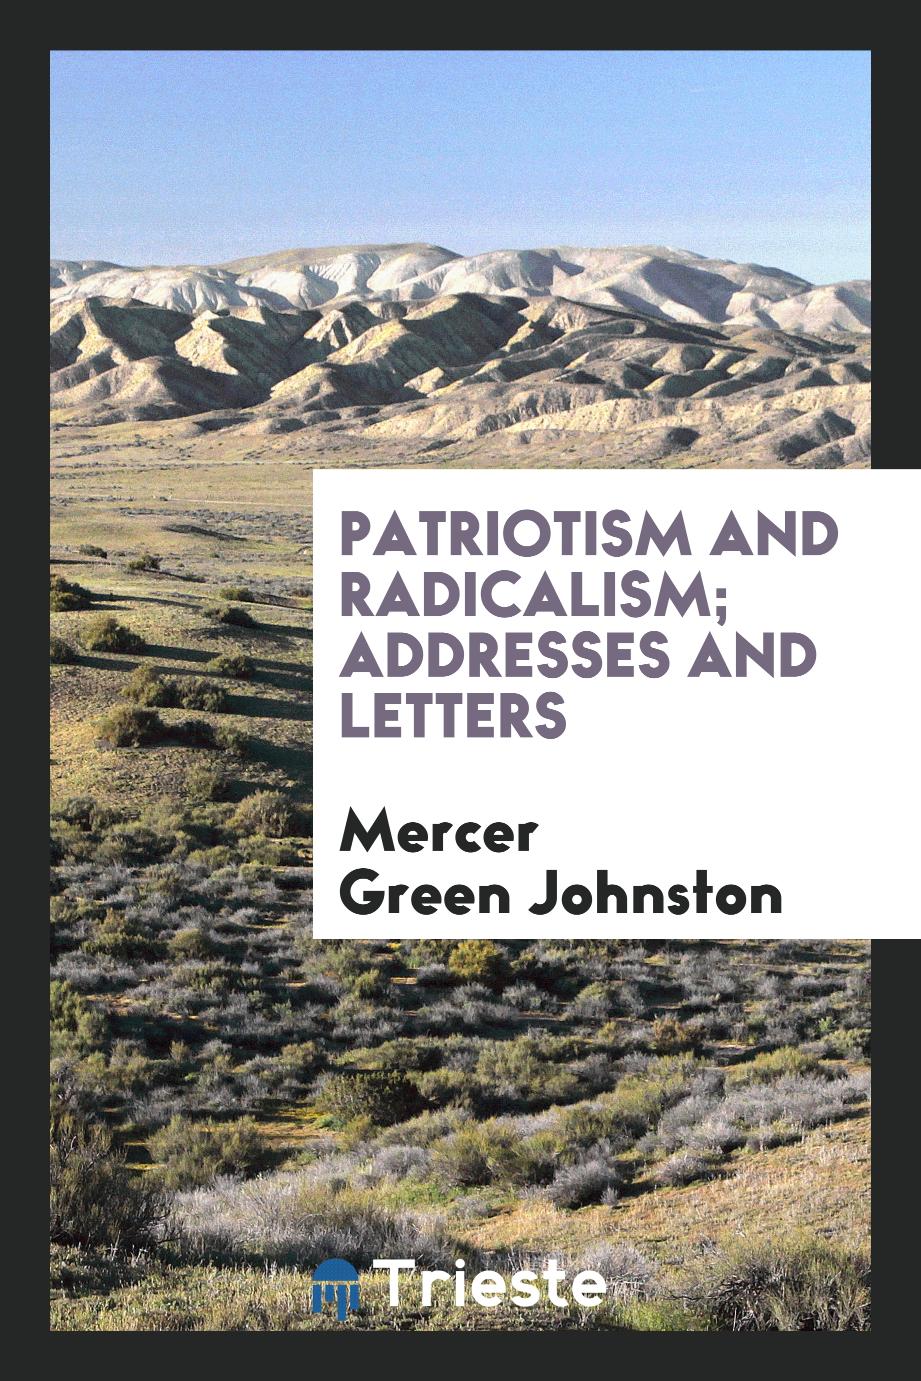 Patriotism and radicalism; addresses and letters